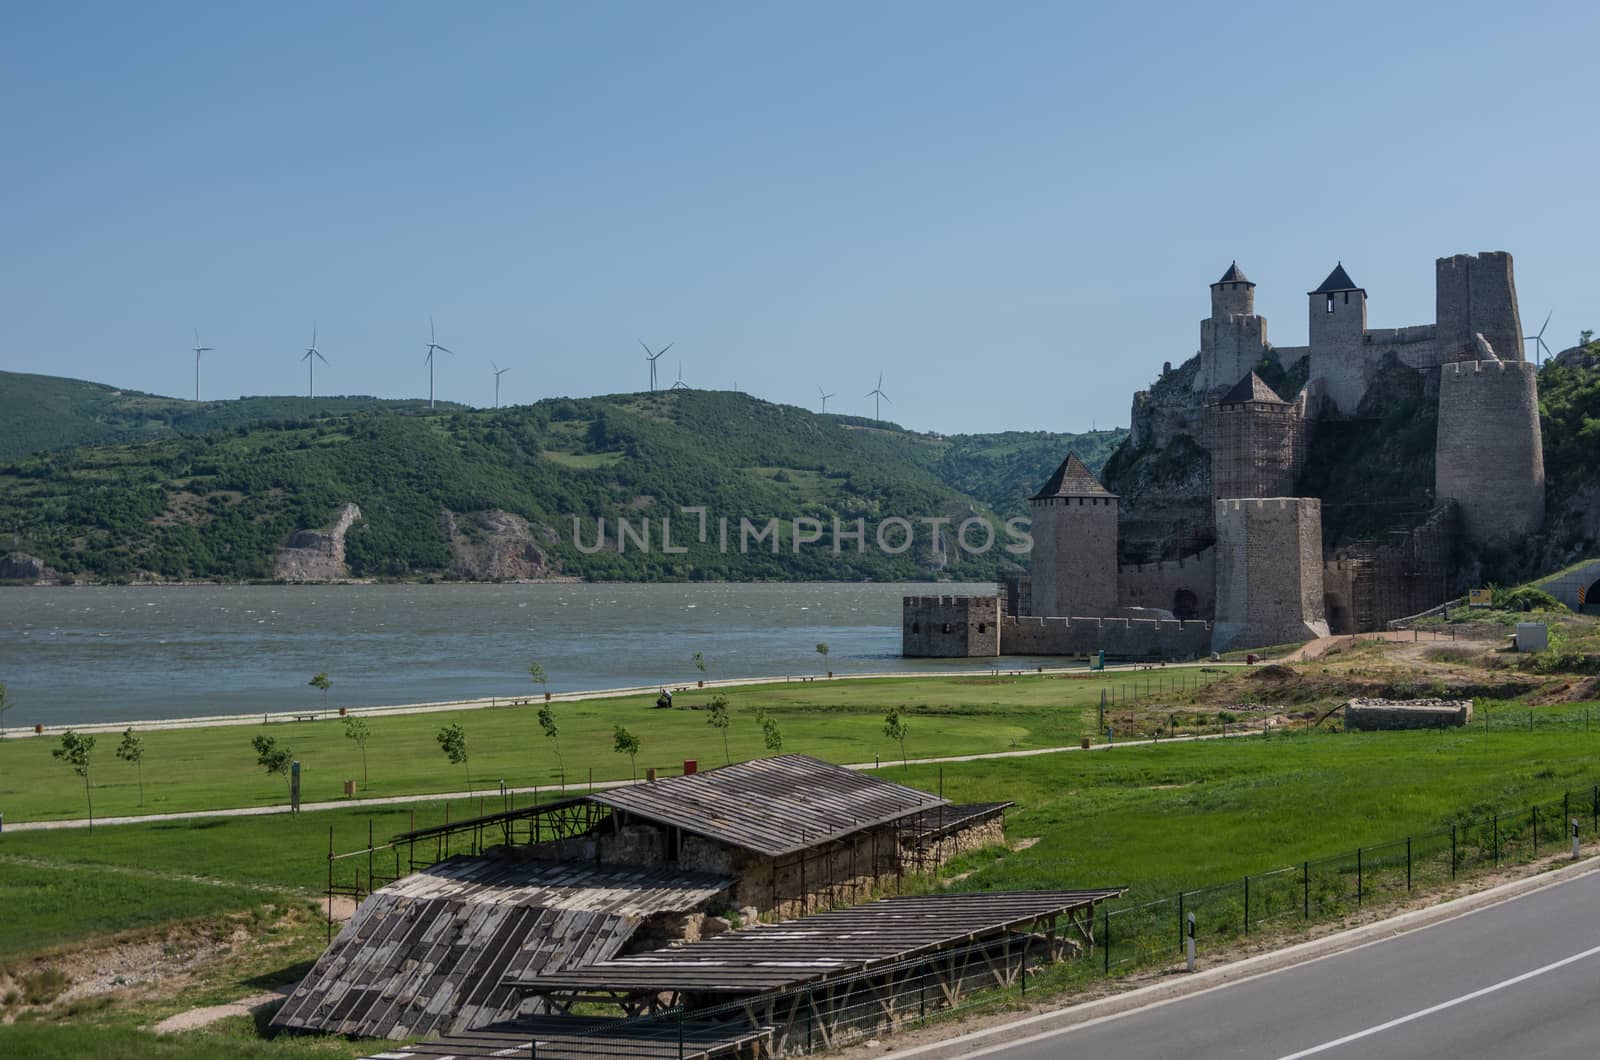 Golubac fortress / castle, built in the 14th century, on the banks of the Danube river in Serbia